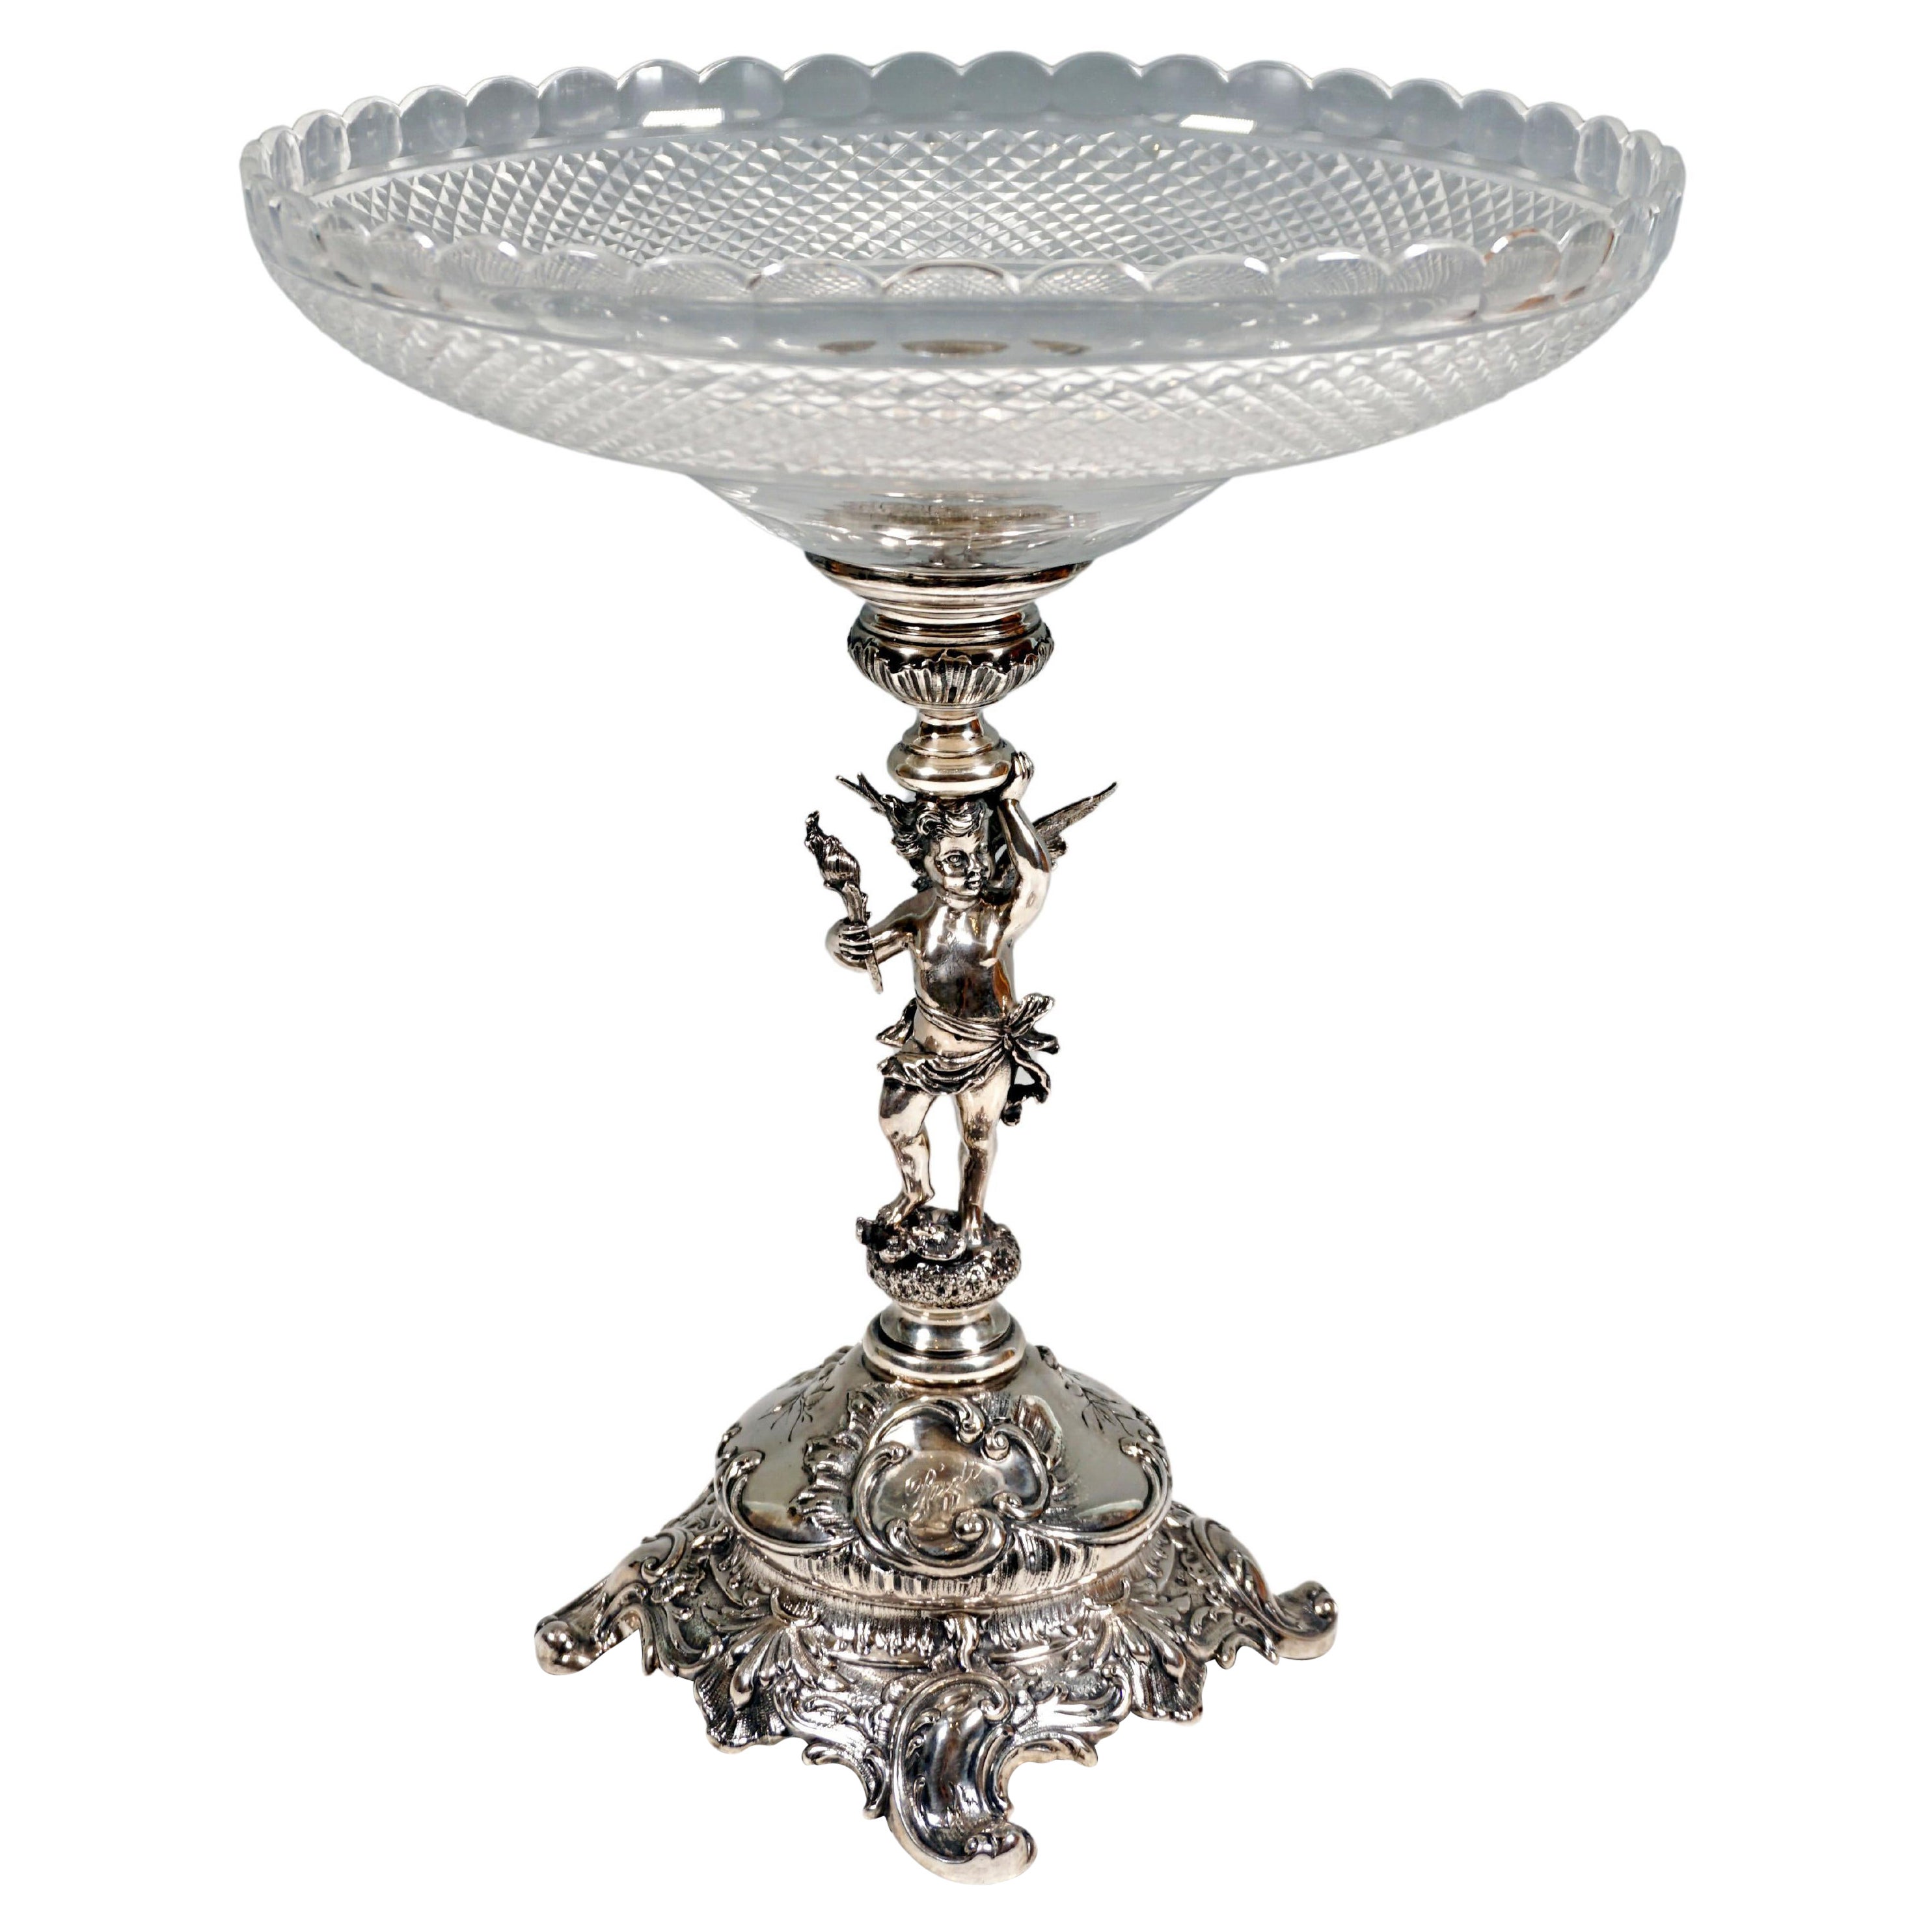 Art Nouveau Vienna Silver Centerpiece with Cupid as a Bowl Carrier, Around 1900